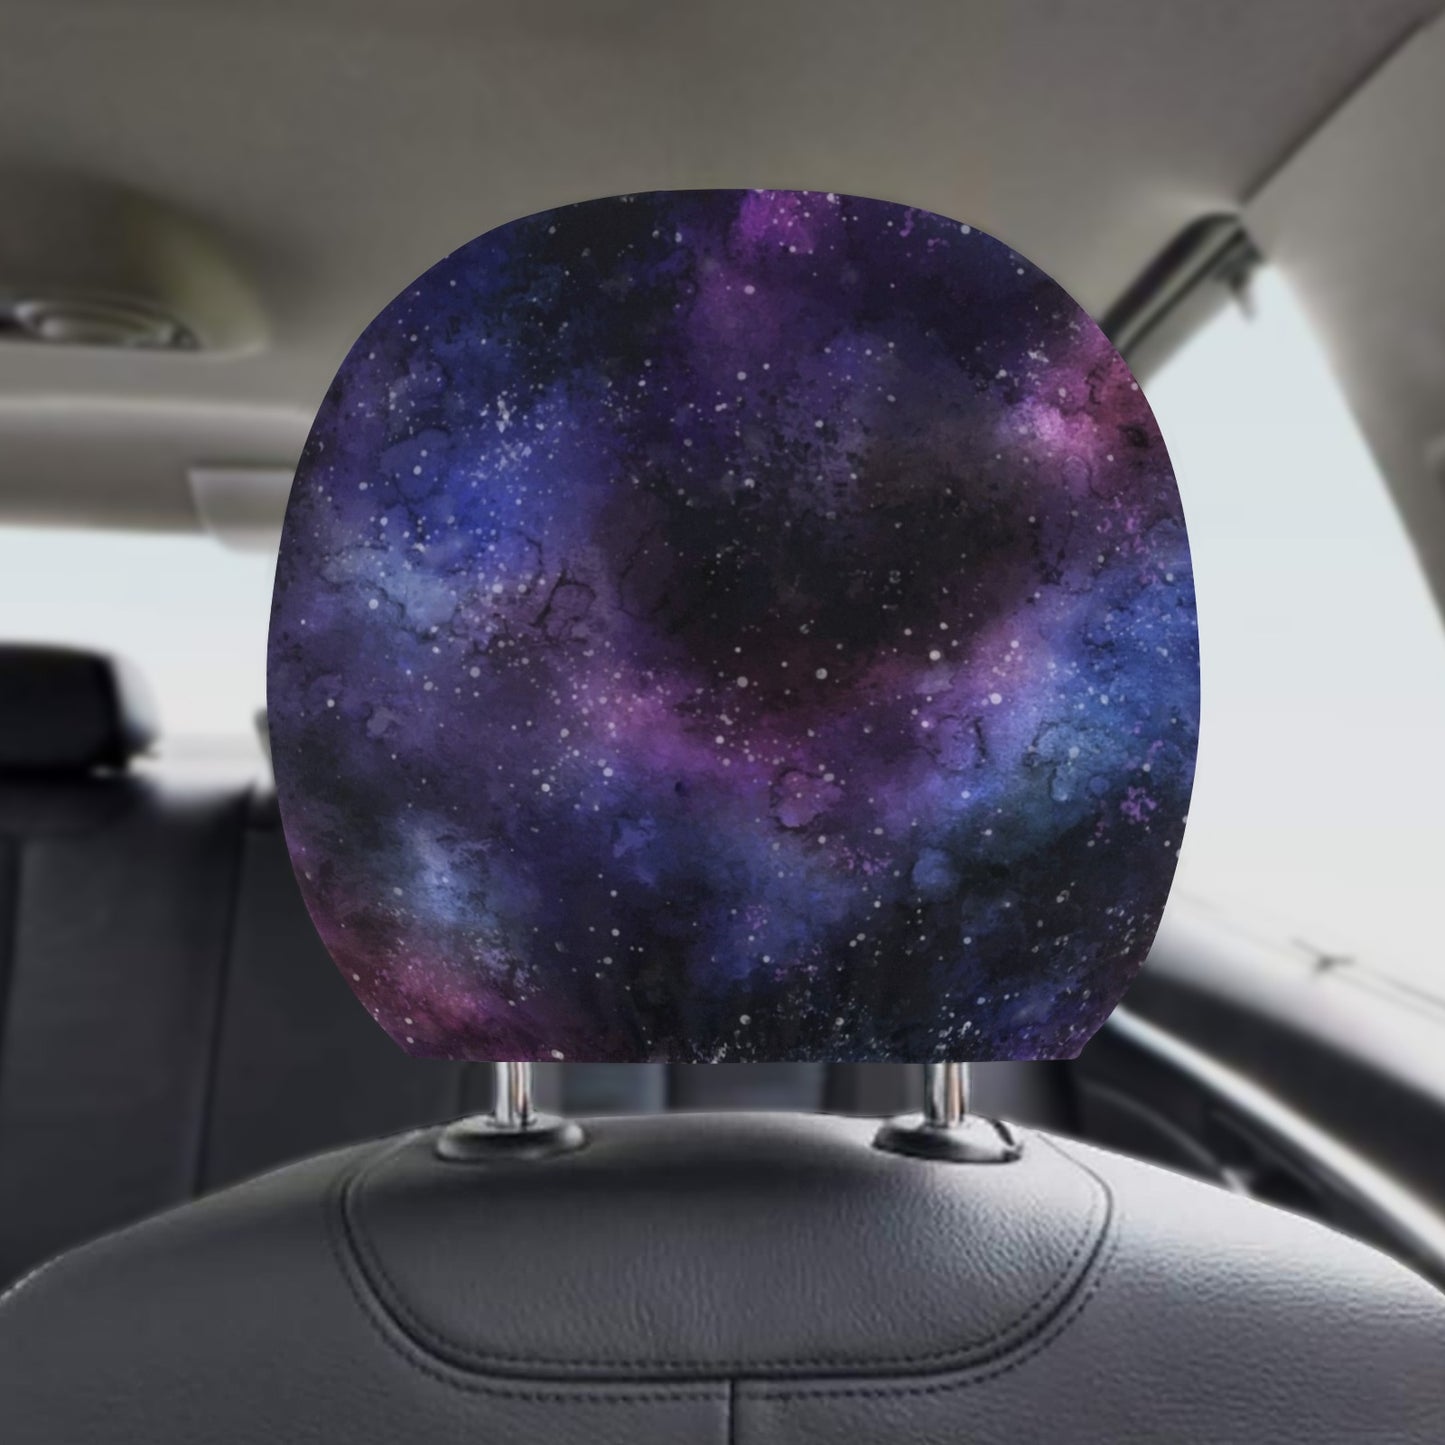 Galaxy Space Car Seat Headrest Cover (2pcs), Stars Purple Truck Suv Van Vehicle Auto Decoration Protector New Car Gift